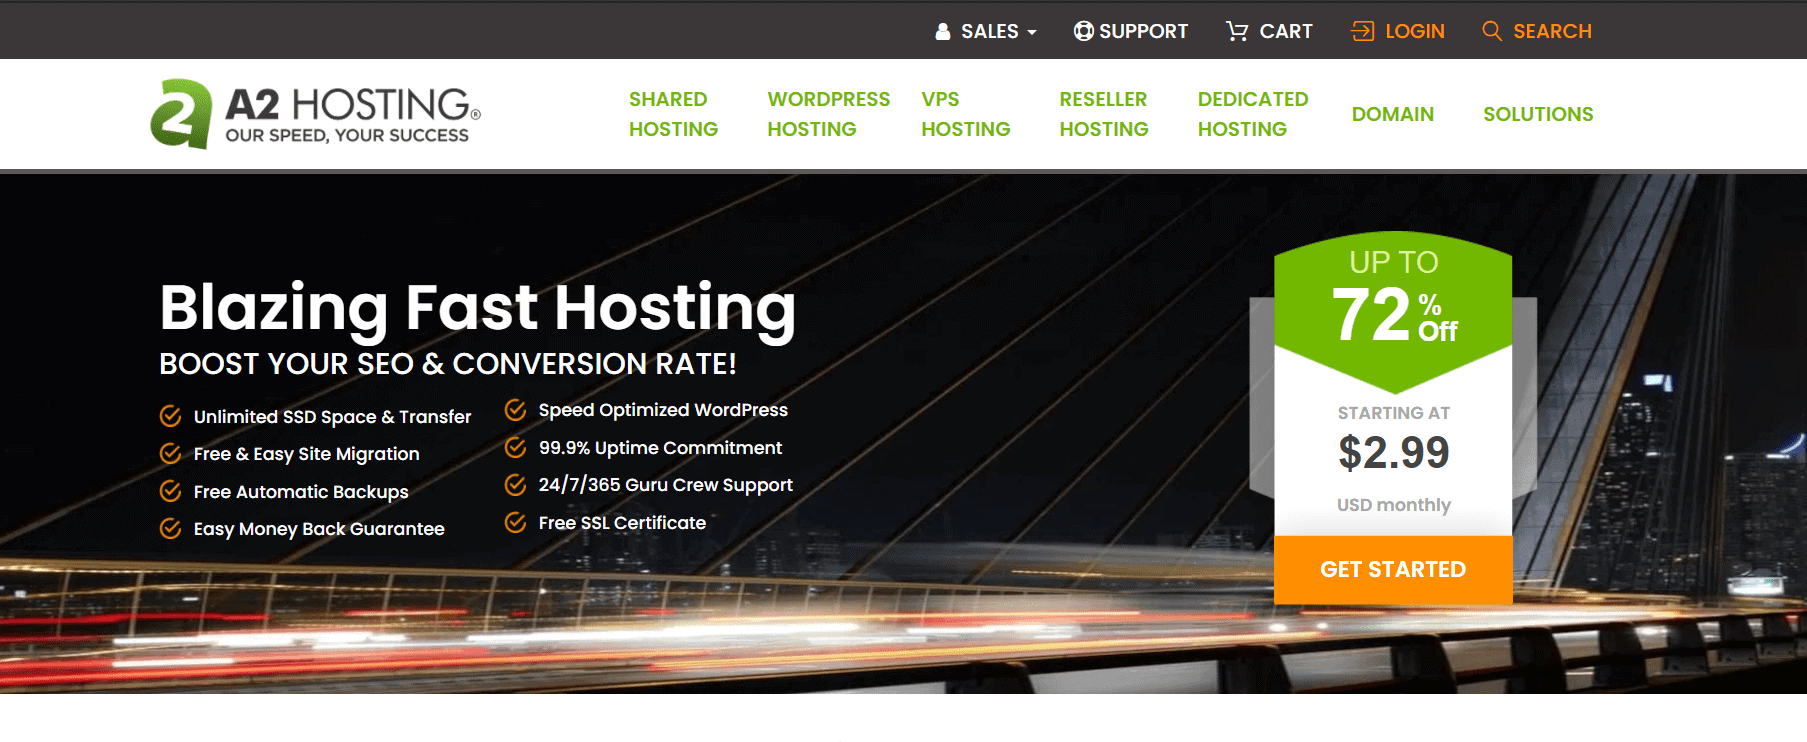 Web Hosting Firms Really Offer Unlimited Hosting Package-A2 Review